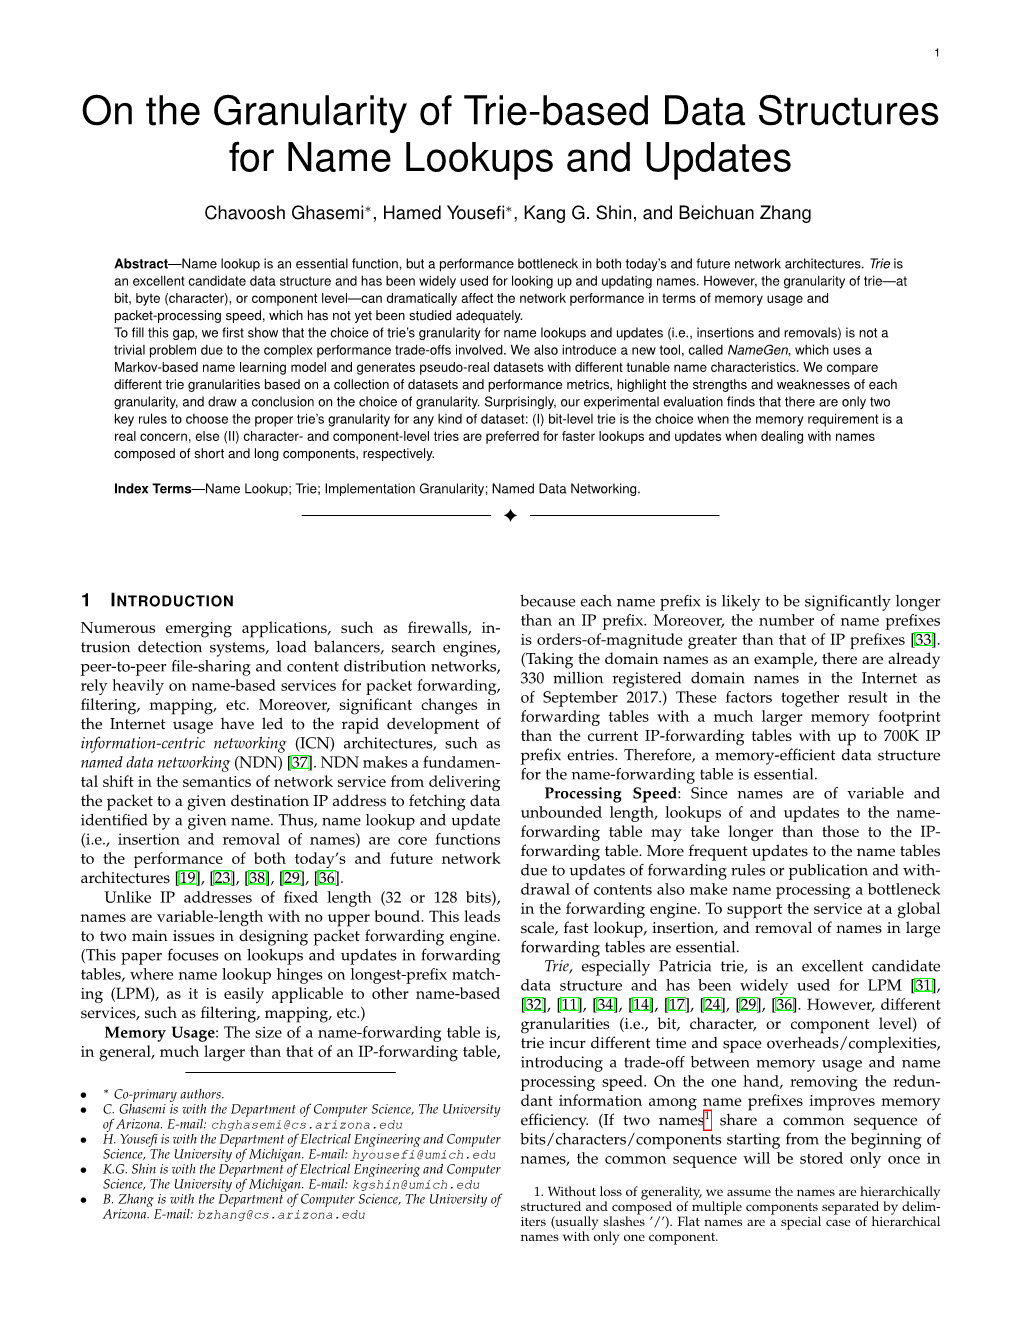 On the Granularity of Trie-Based Data Structures for Name Lookups and Updates